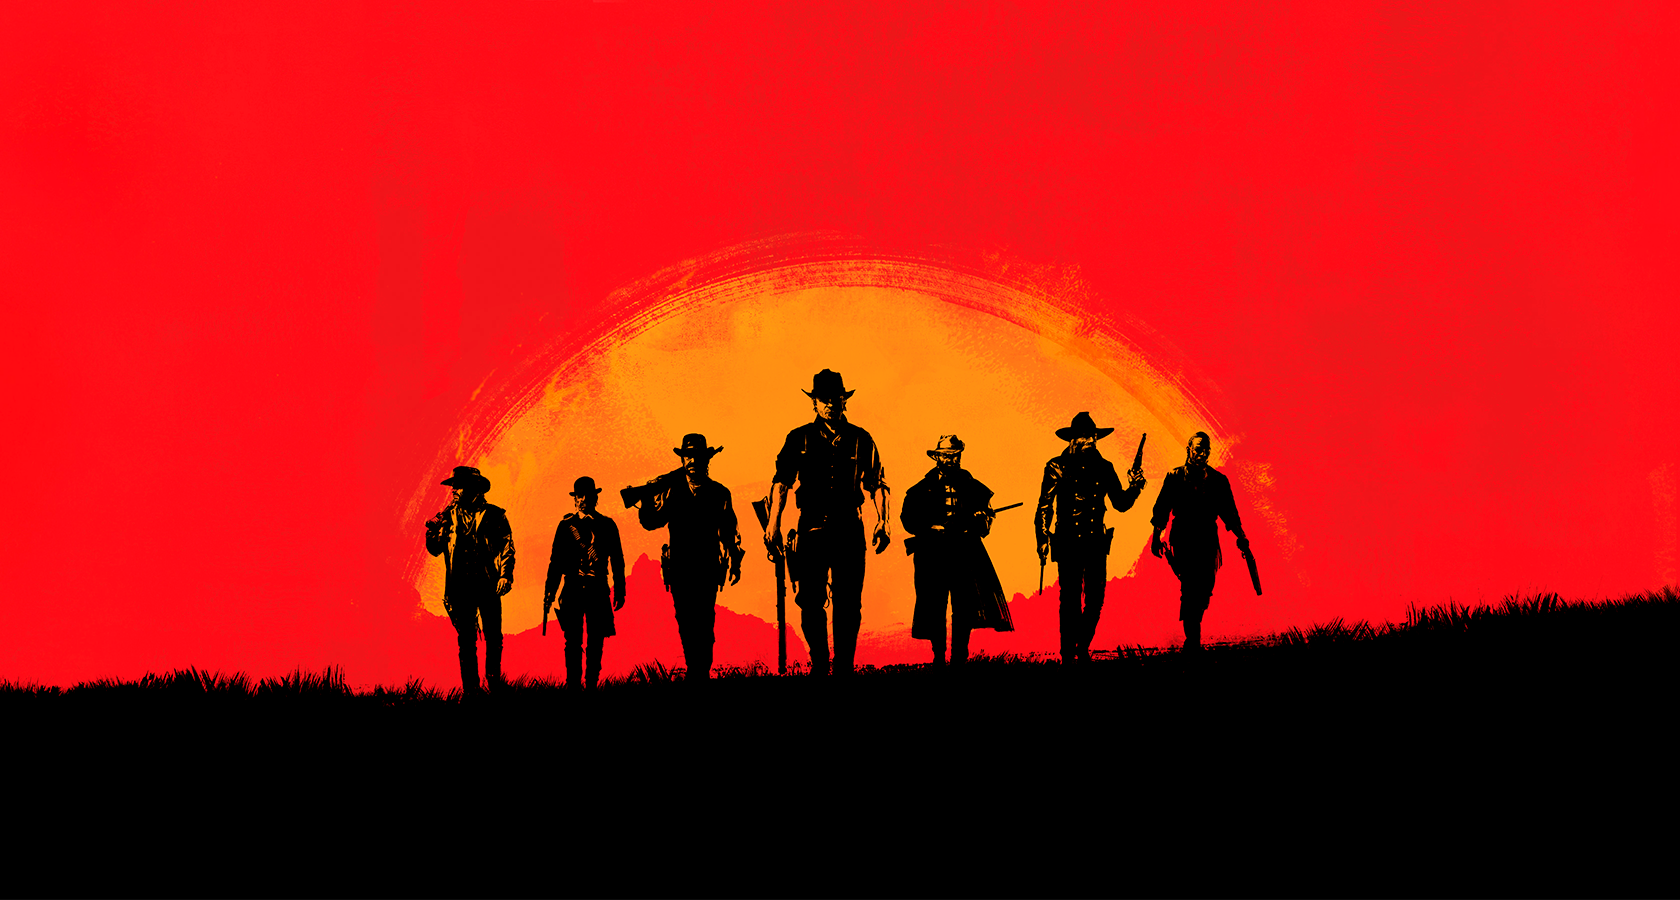 РДР 2. Red Dead Redemption 2 poster. Red Redemption 2. Red Dead Redemption 2 Постер. Рдр бокс